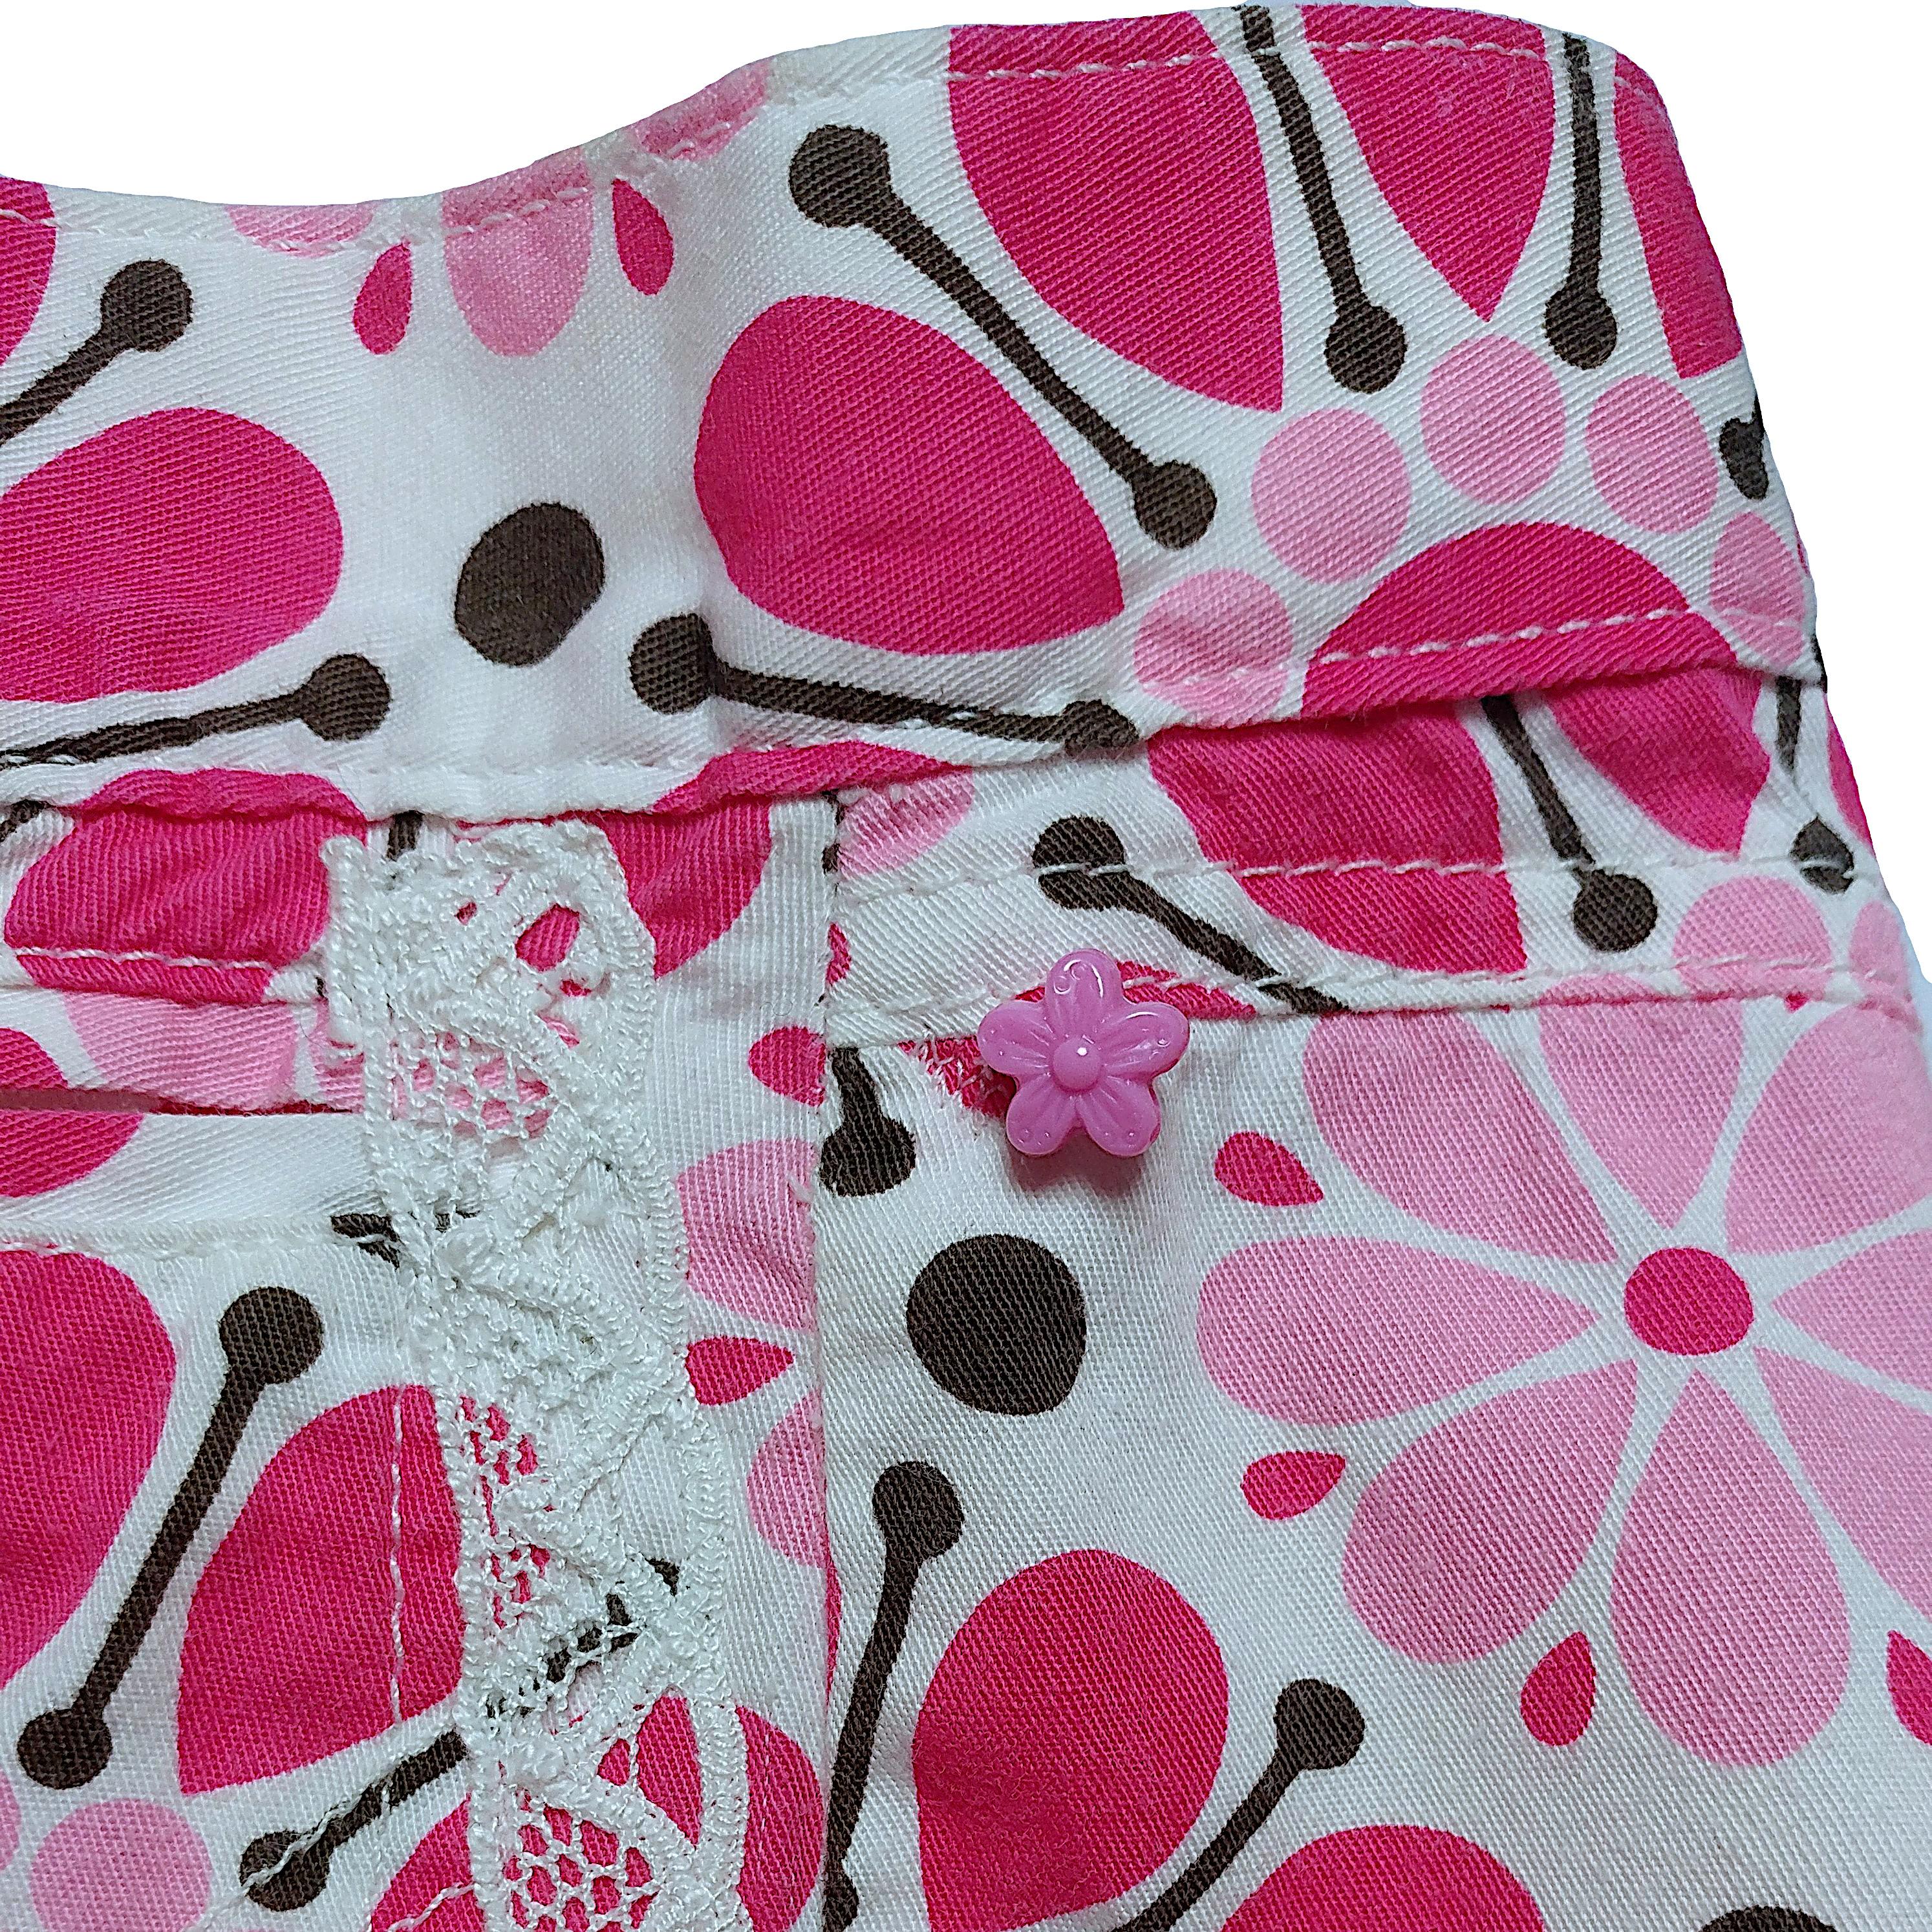 DOLCE&GABBANA  Vintage Cotton White and Pink Shorts with Floral Print  Size S 3